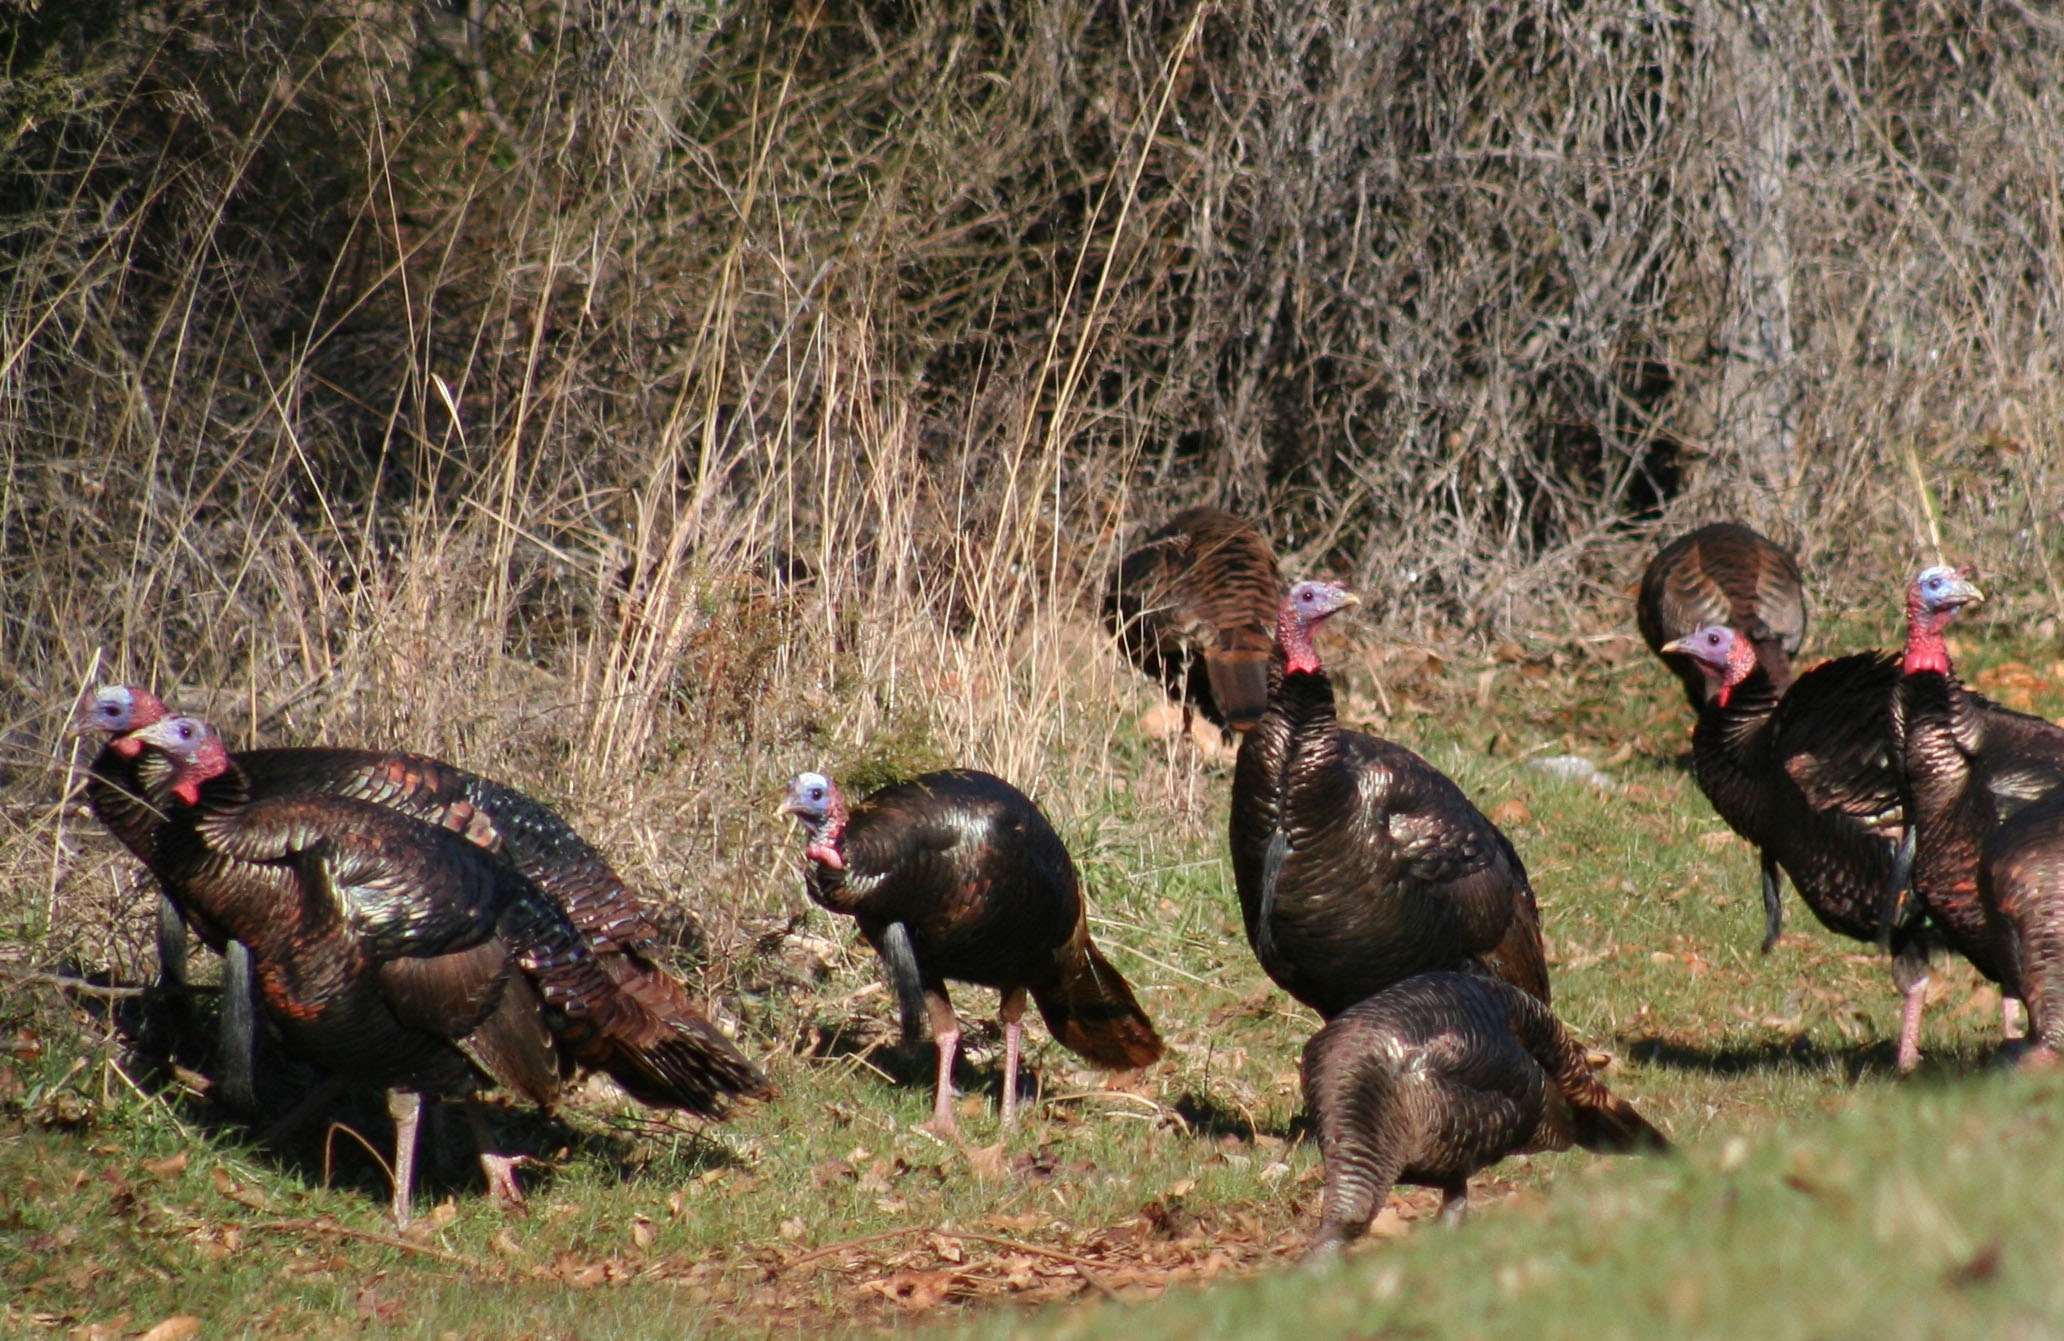 April calendar: Statewide turkey season opens April 9 (male and bearded only).